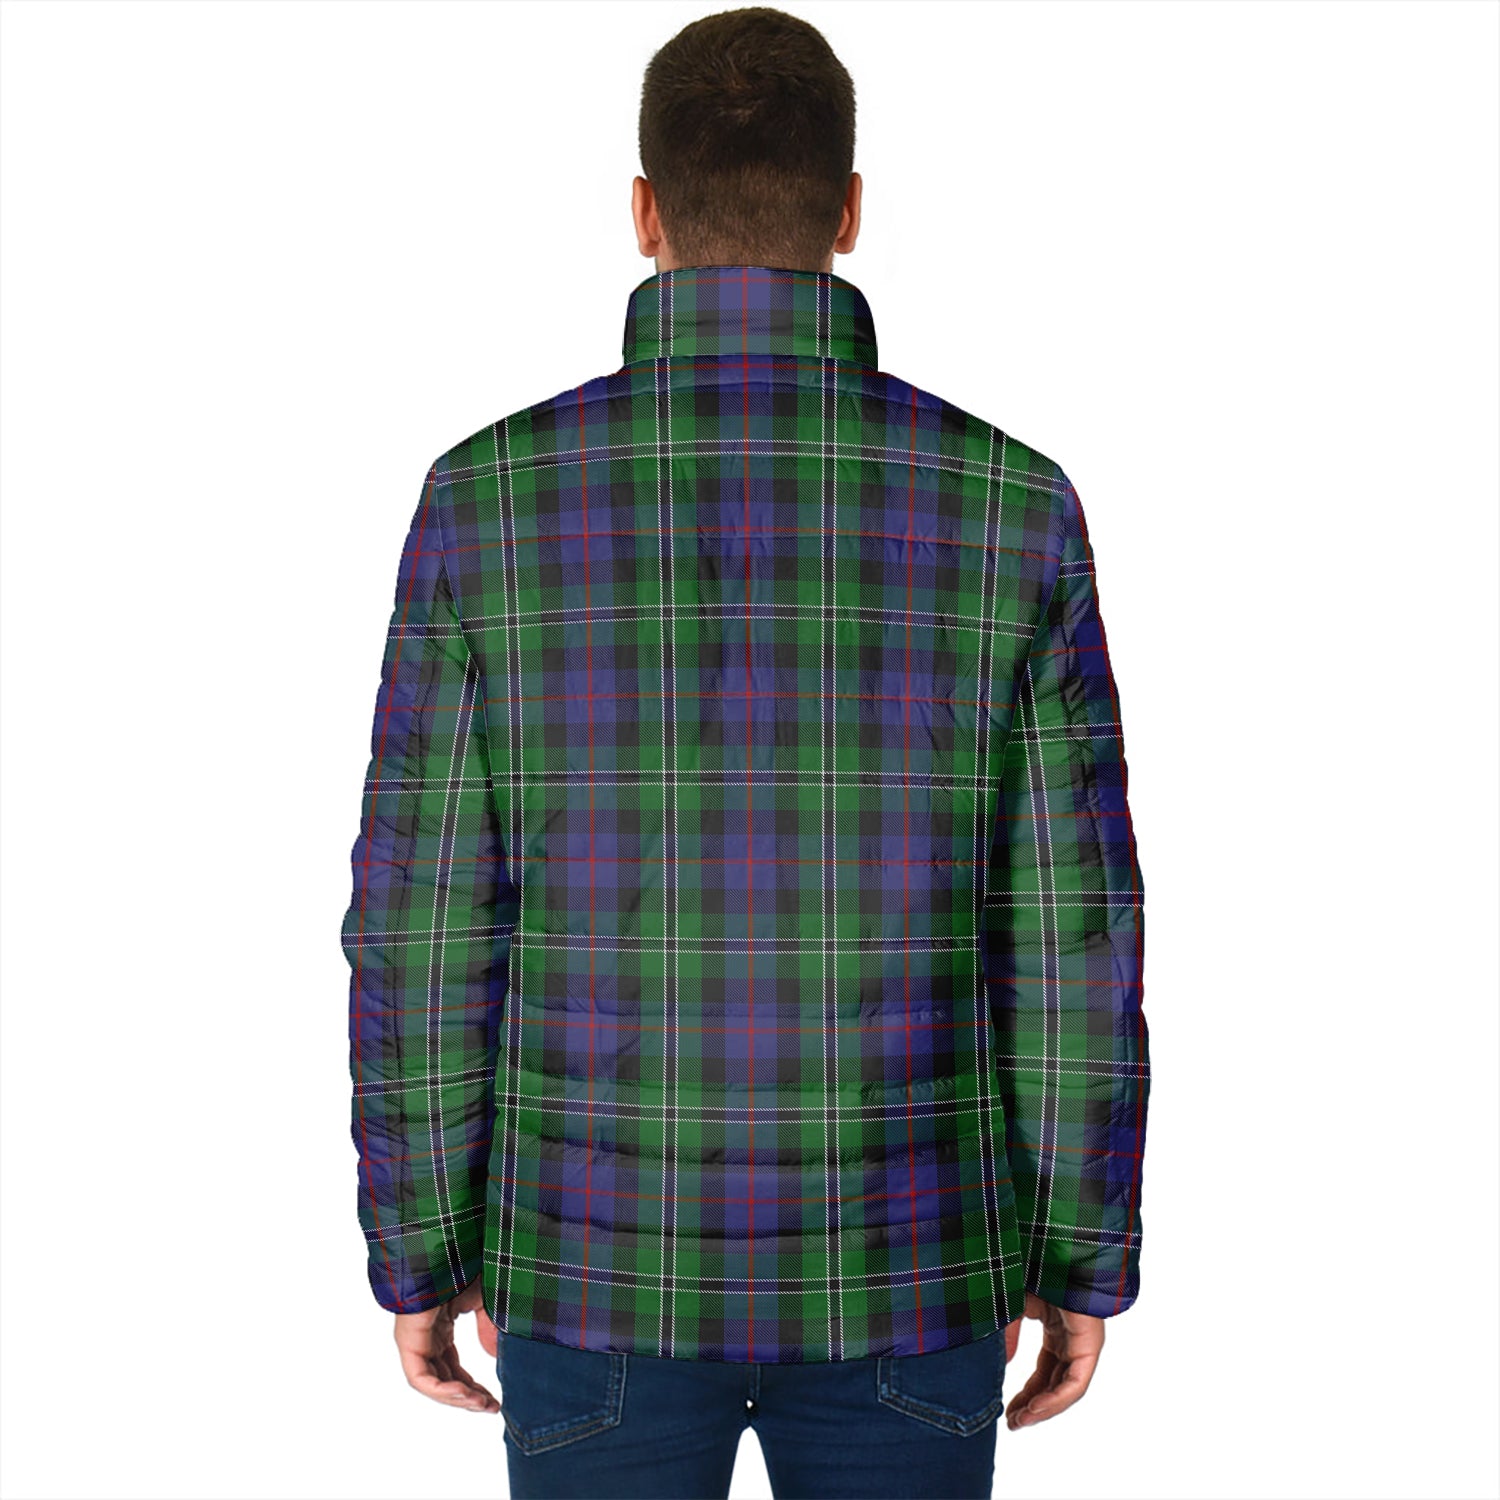 rose-hunting-tartan-padded-jacket-with-family-crest